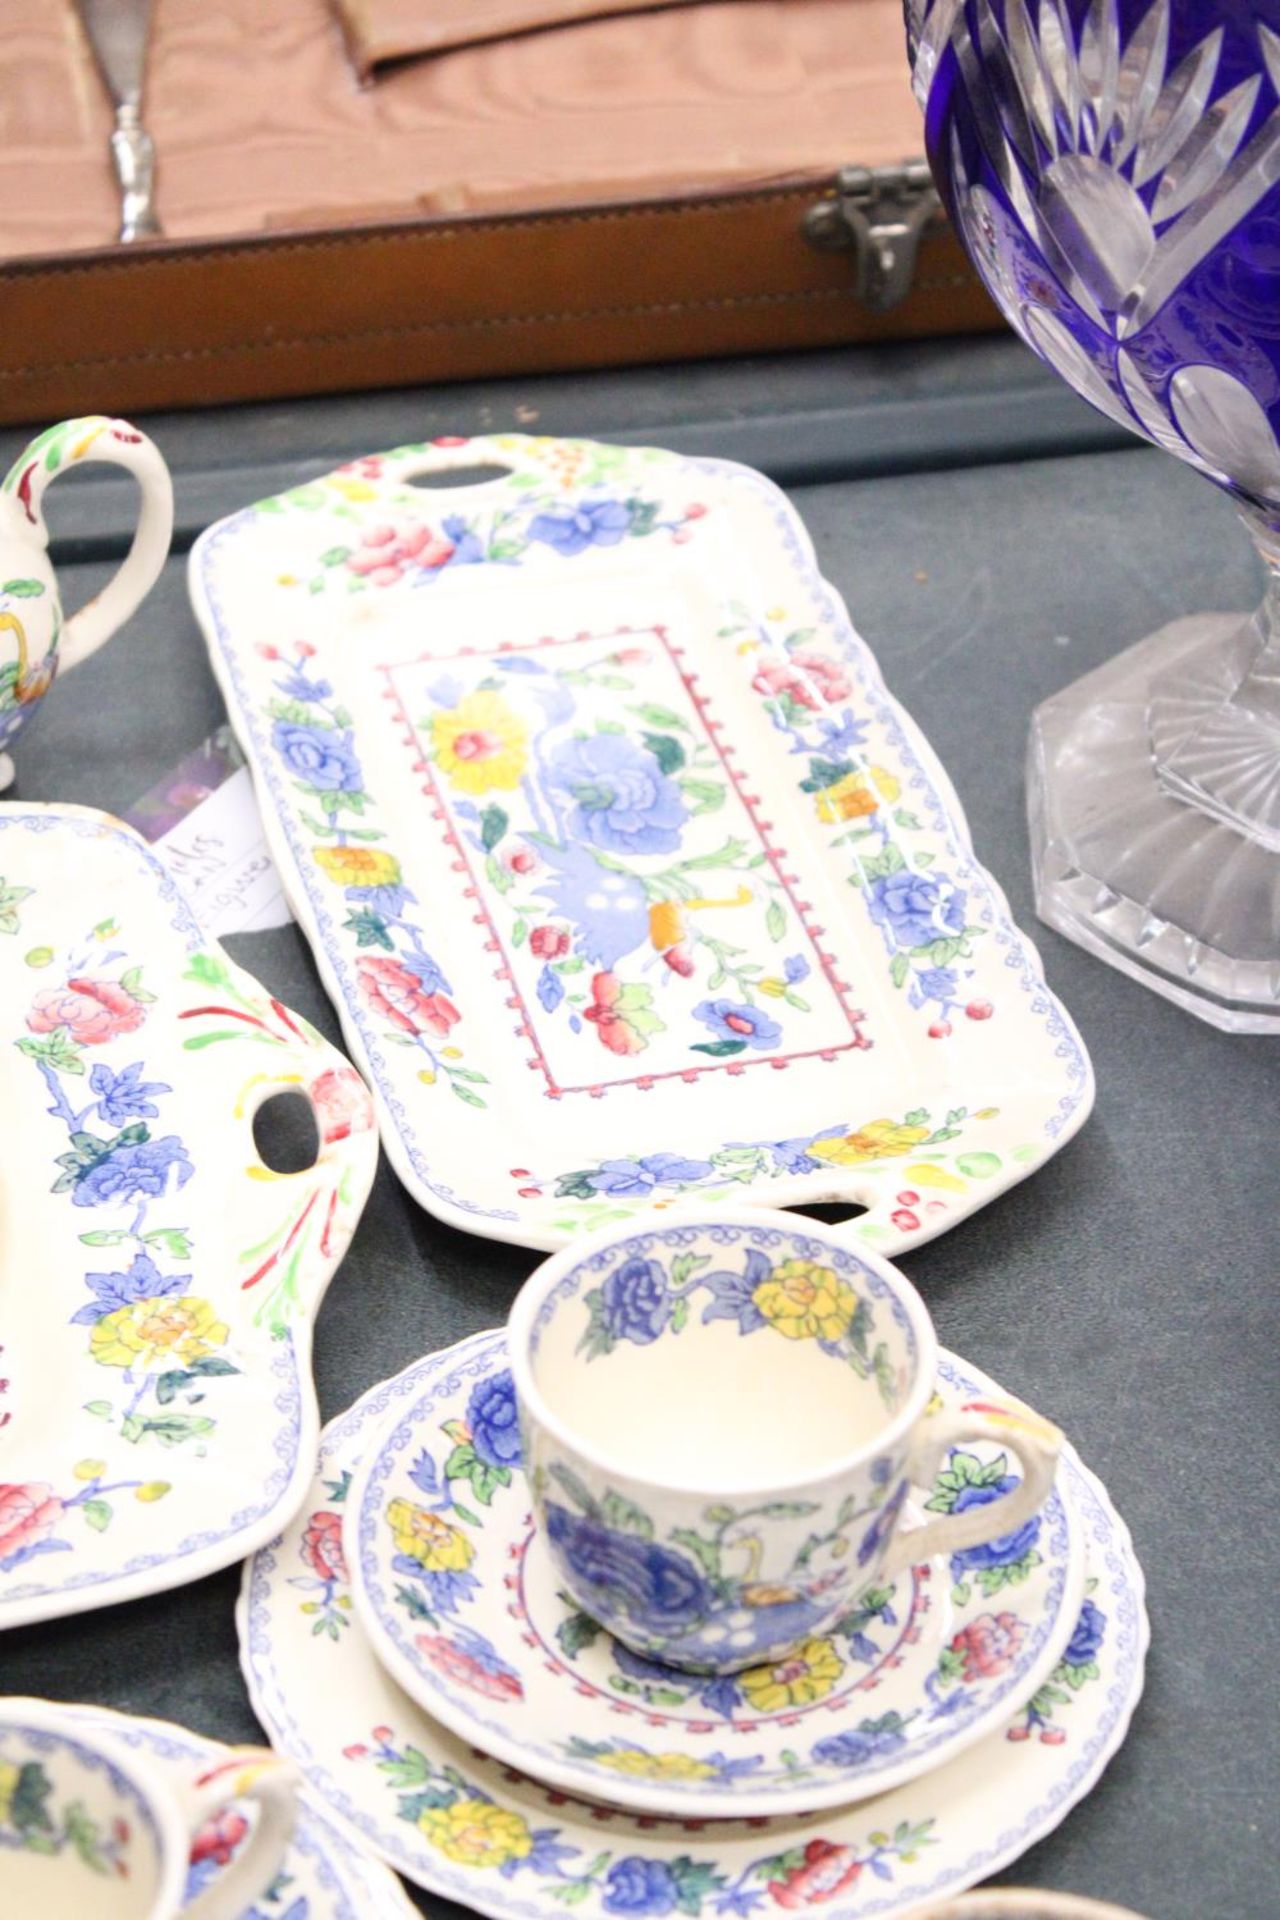 A QUANTITY OF MASONS "REGENCY" WARE TO INCLUDE A TEAPOT, CUPS, SAUCERS, PLATES ETC - Image 5 of 5